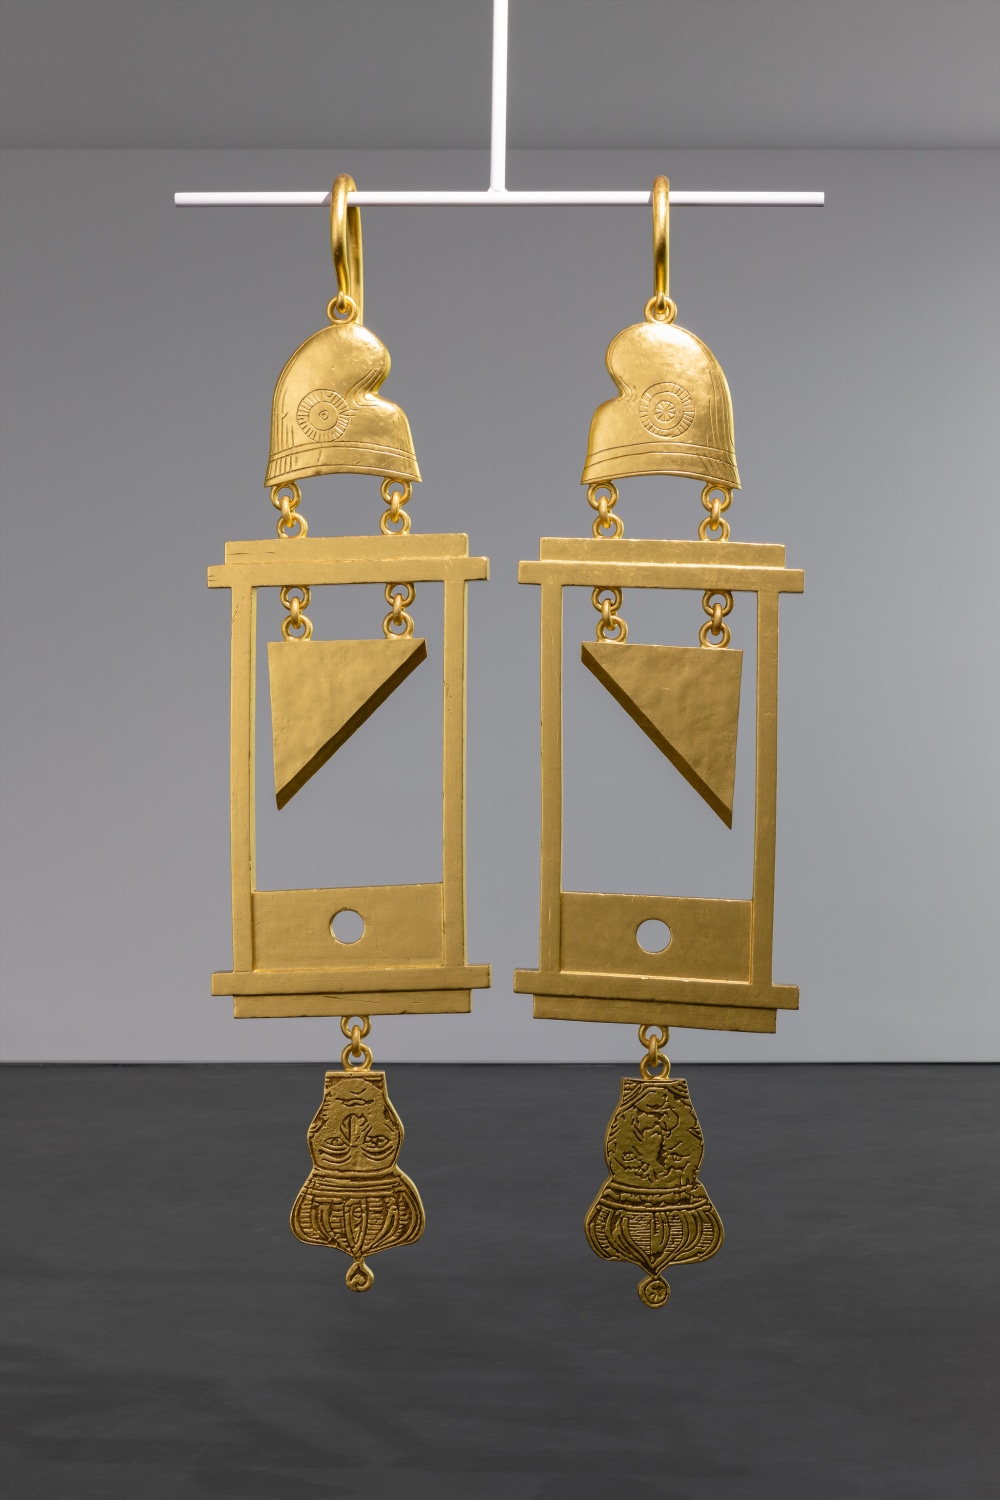 Guillotine Earrings  Featuring the Heads of Louis 16th and Marie